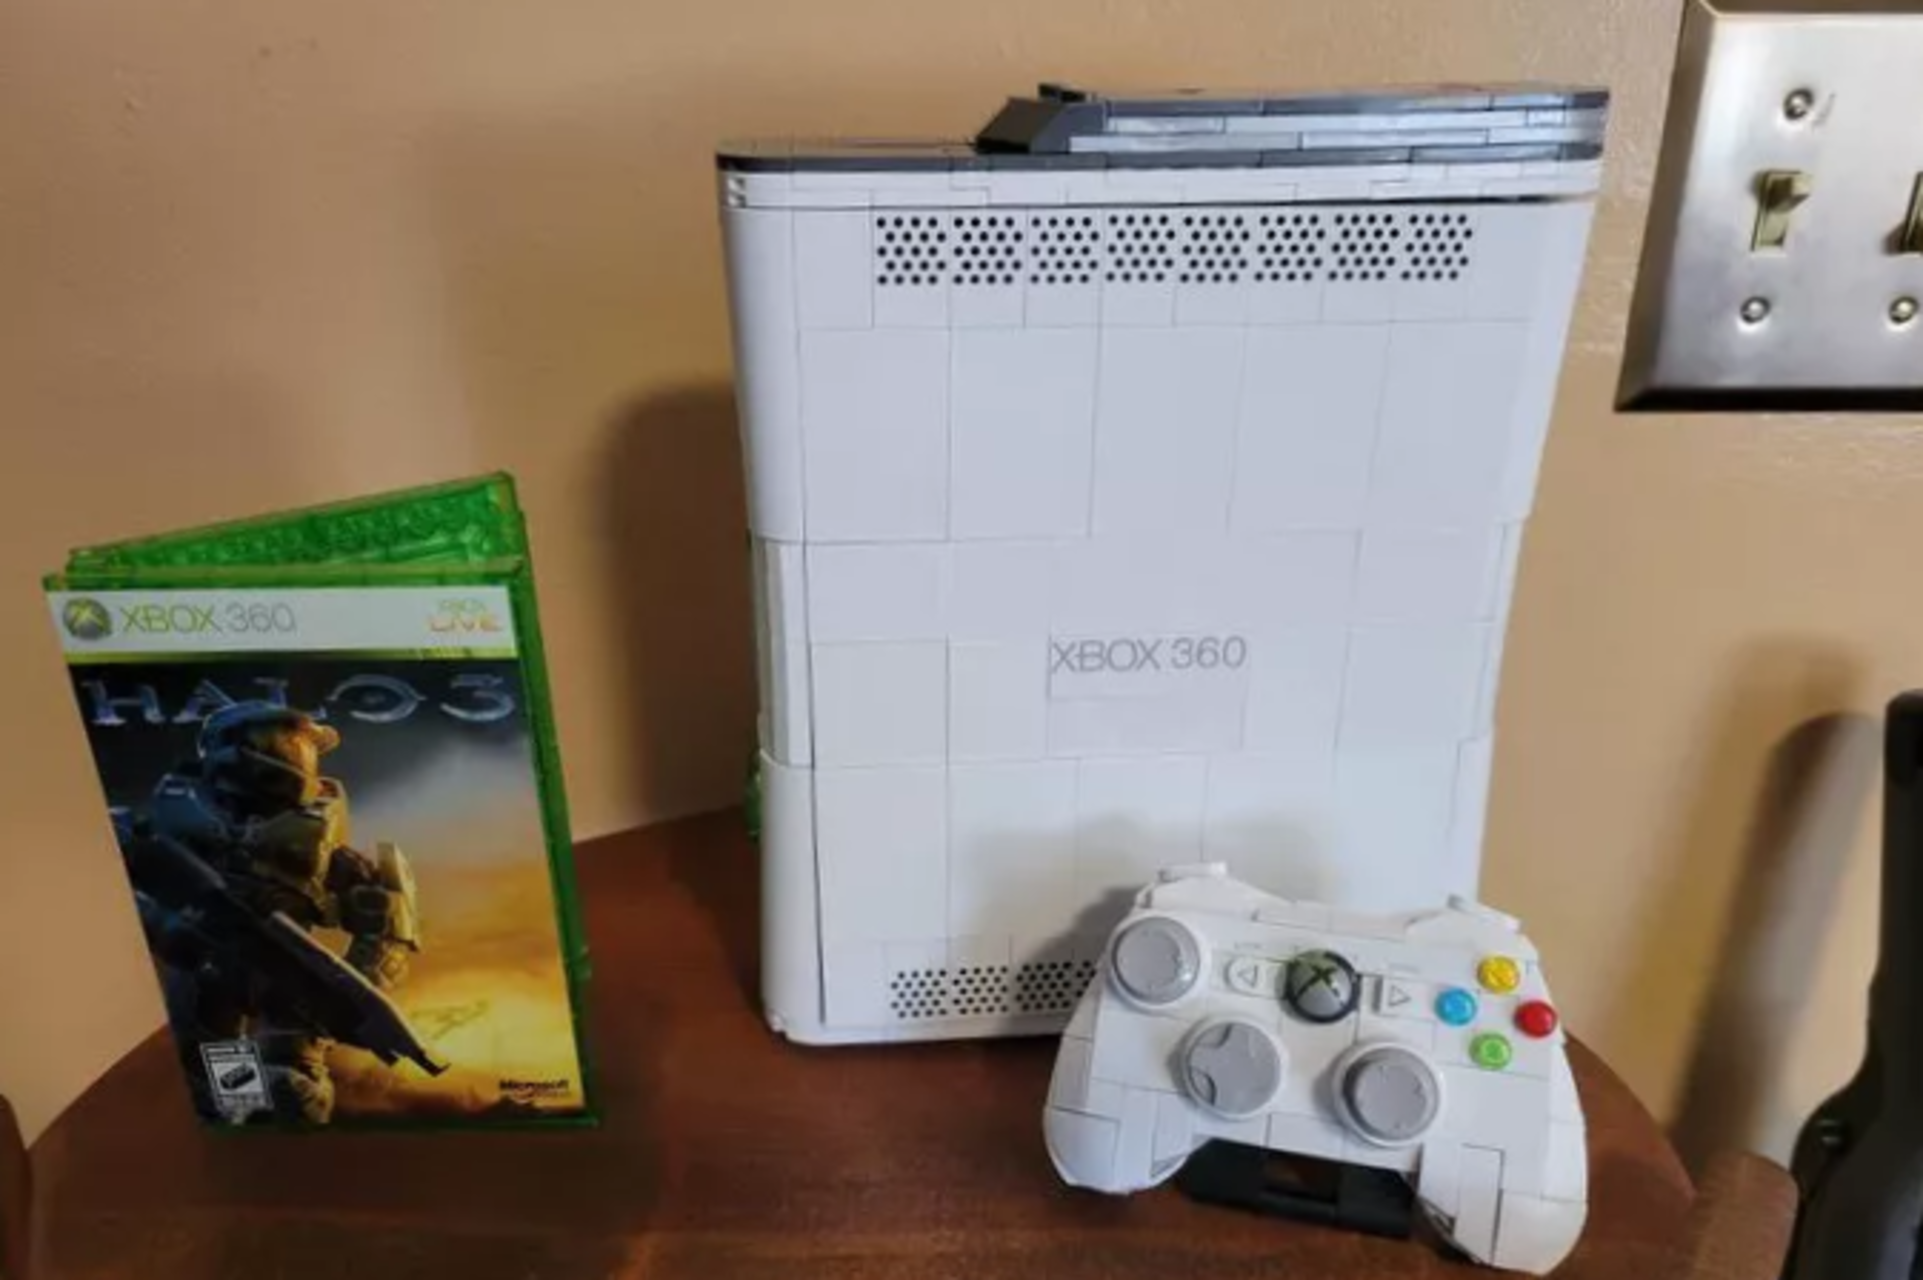 Your favourite collectible, MEGA Showcase Microsoft Xbox 360, is available at a $50 discount